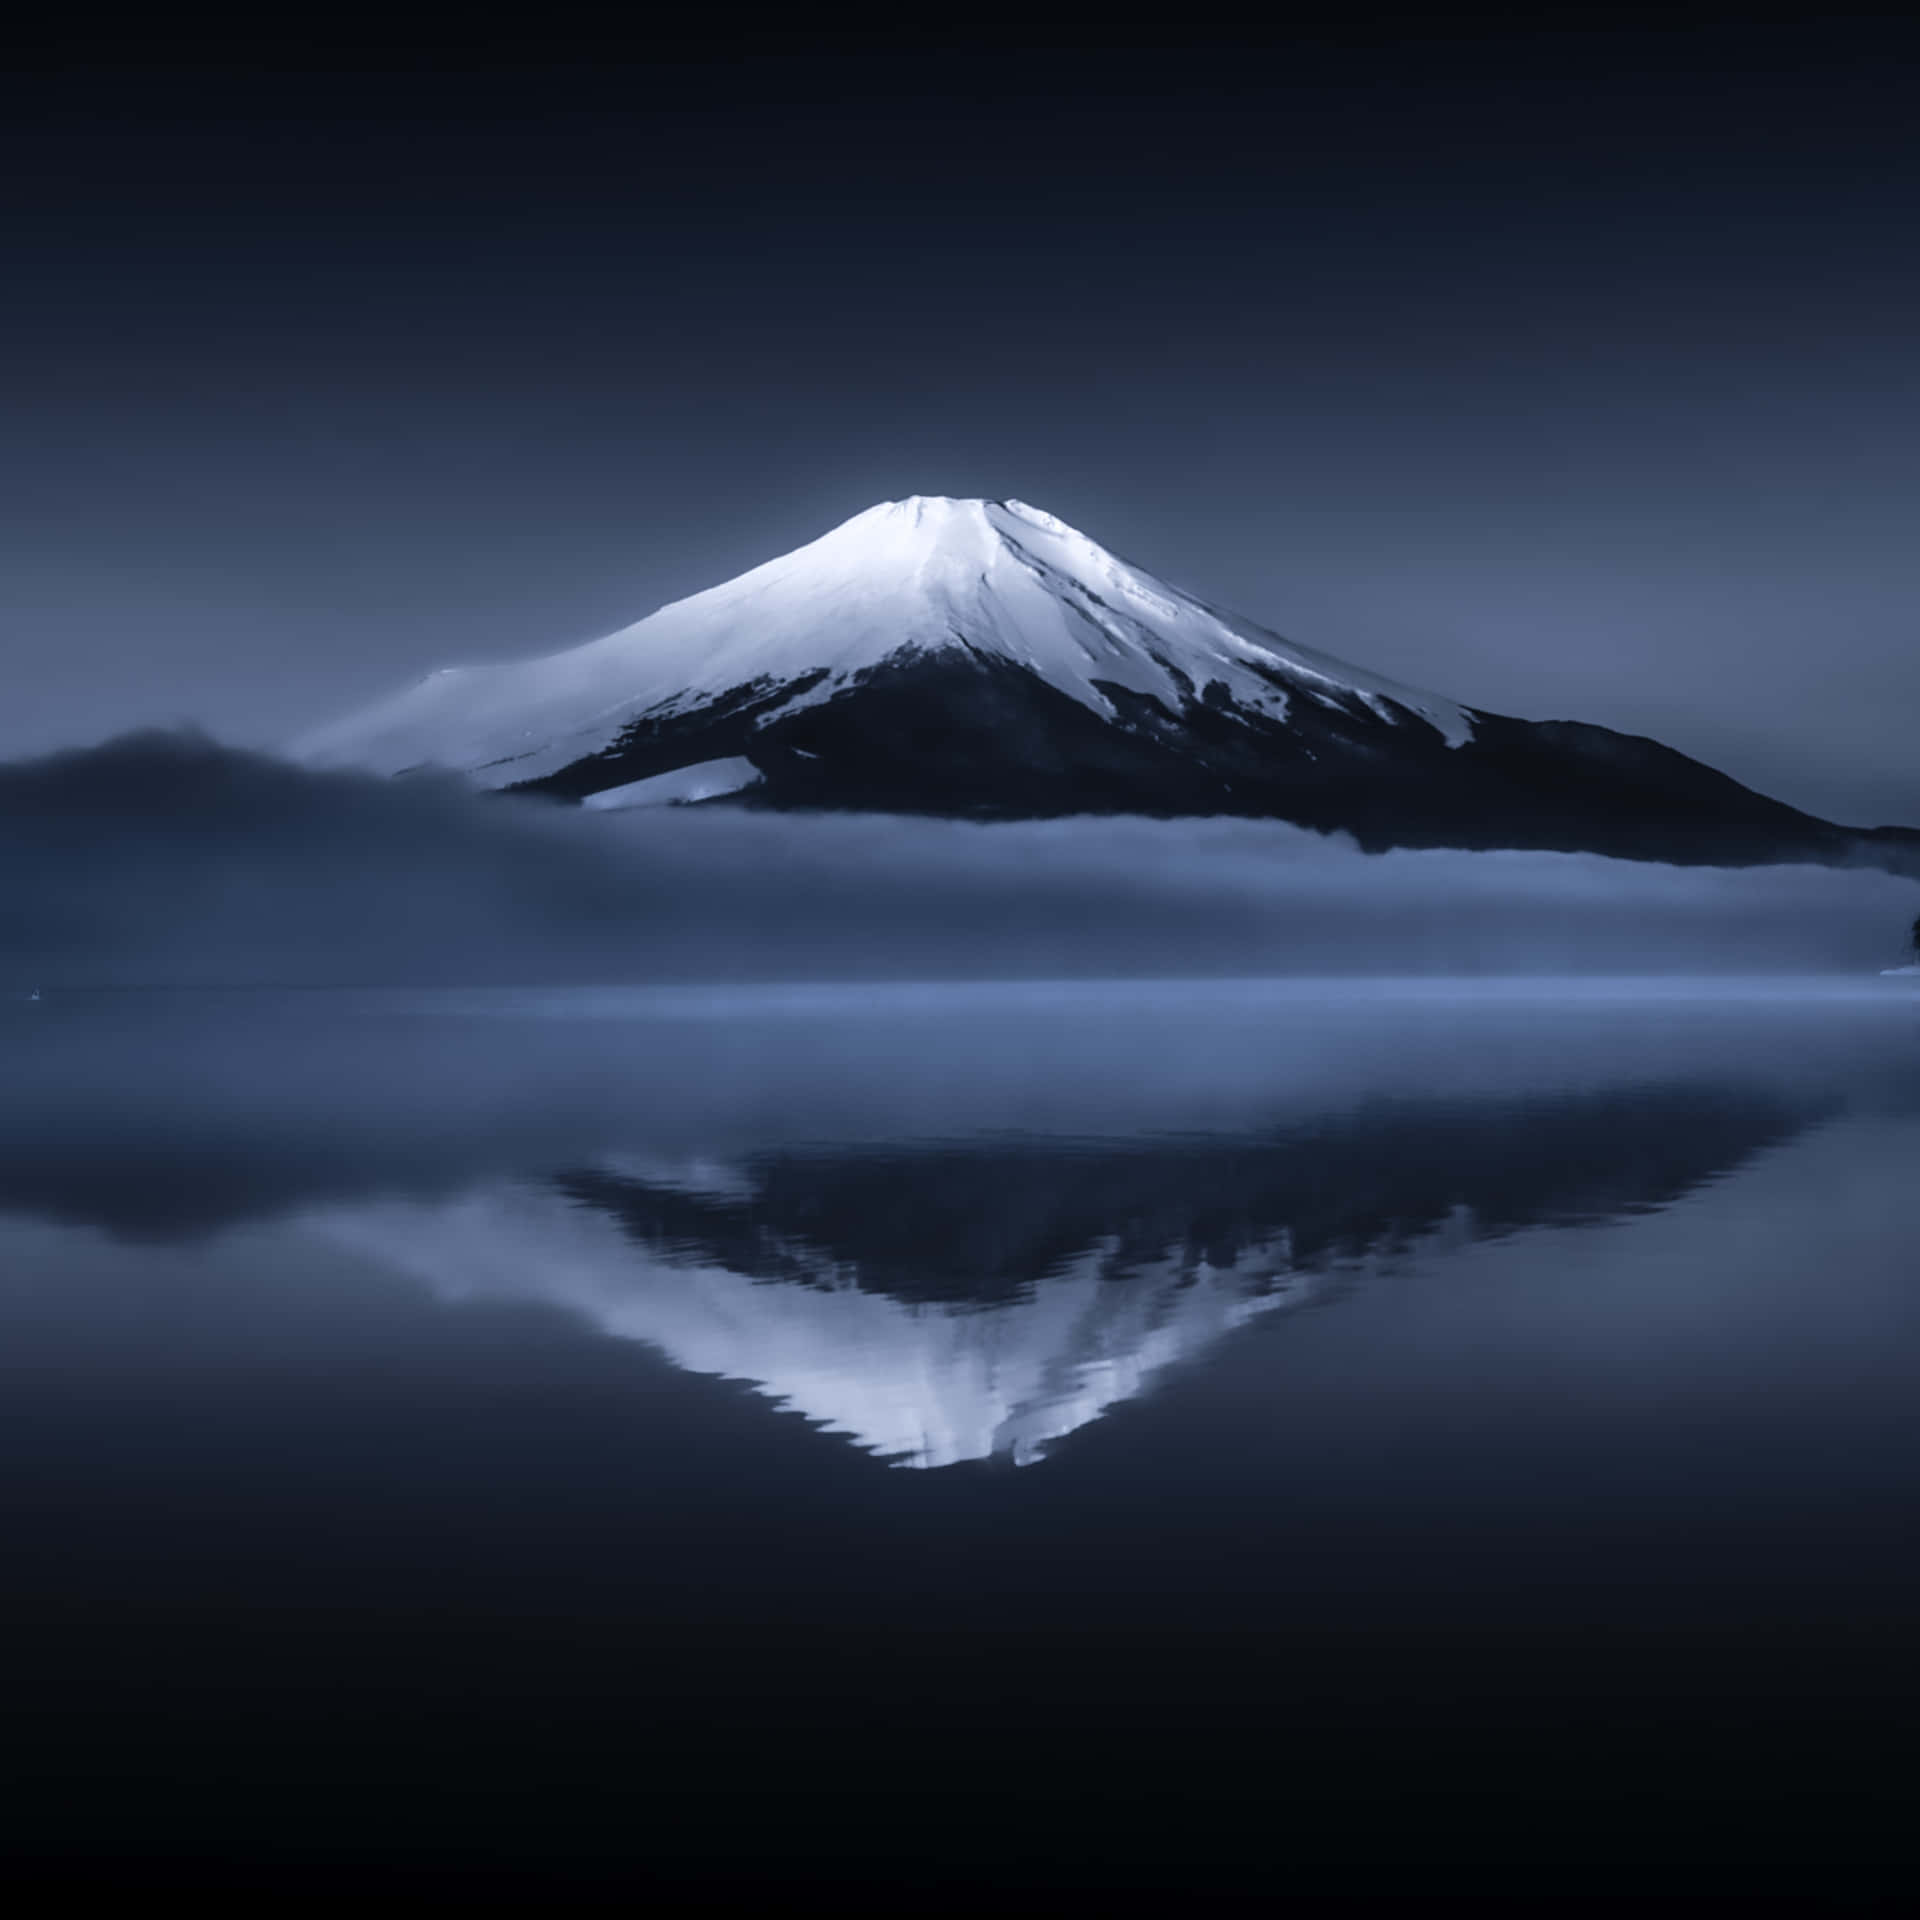 A Mountain Is Reflected In A Lake At Night